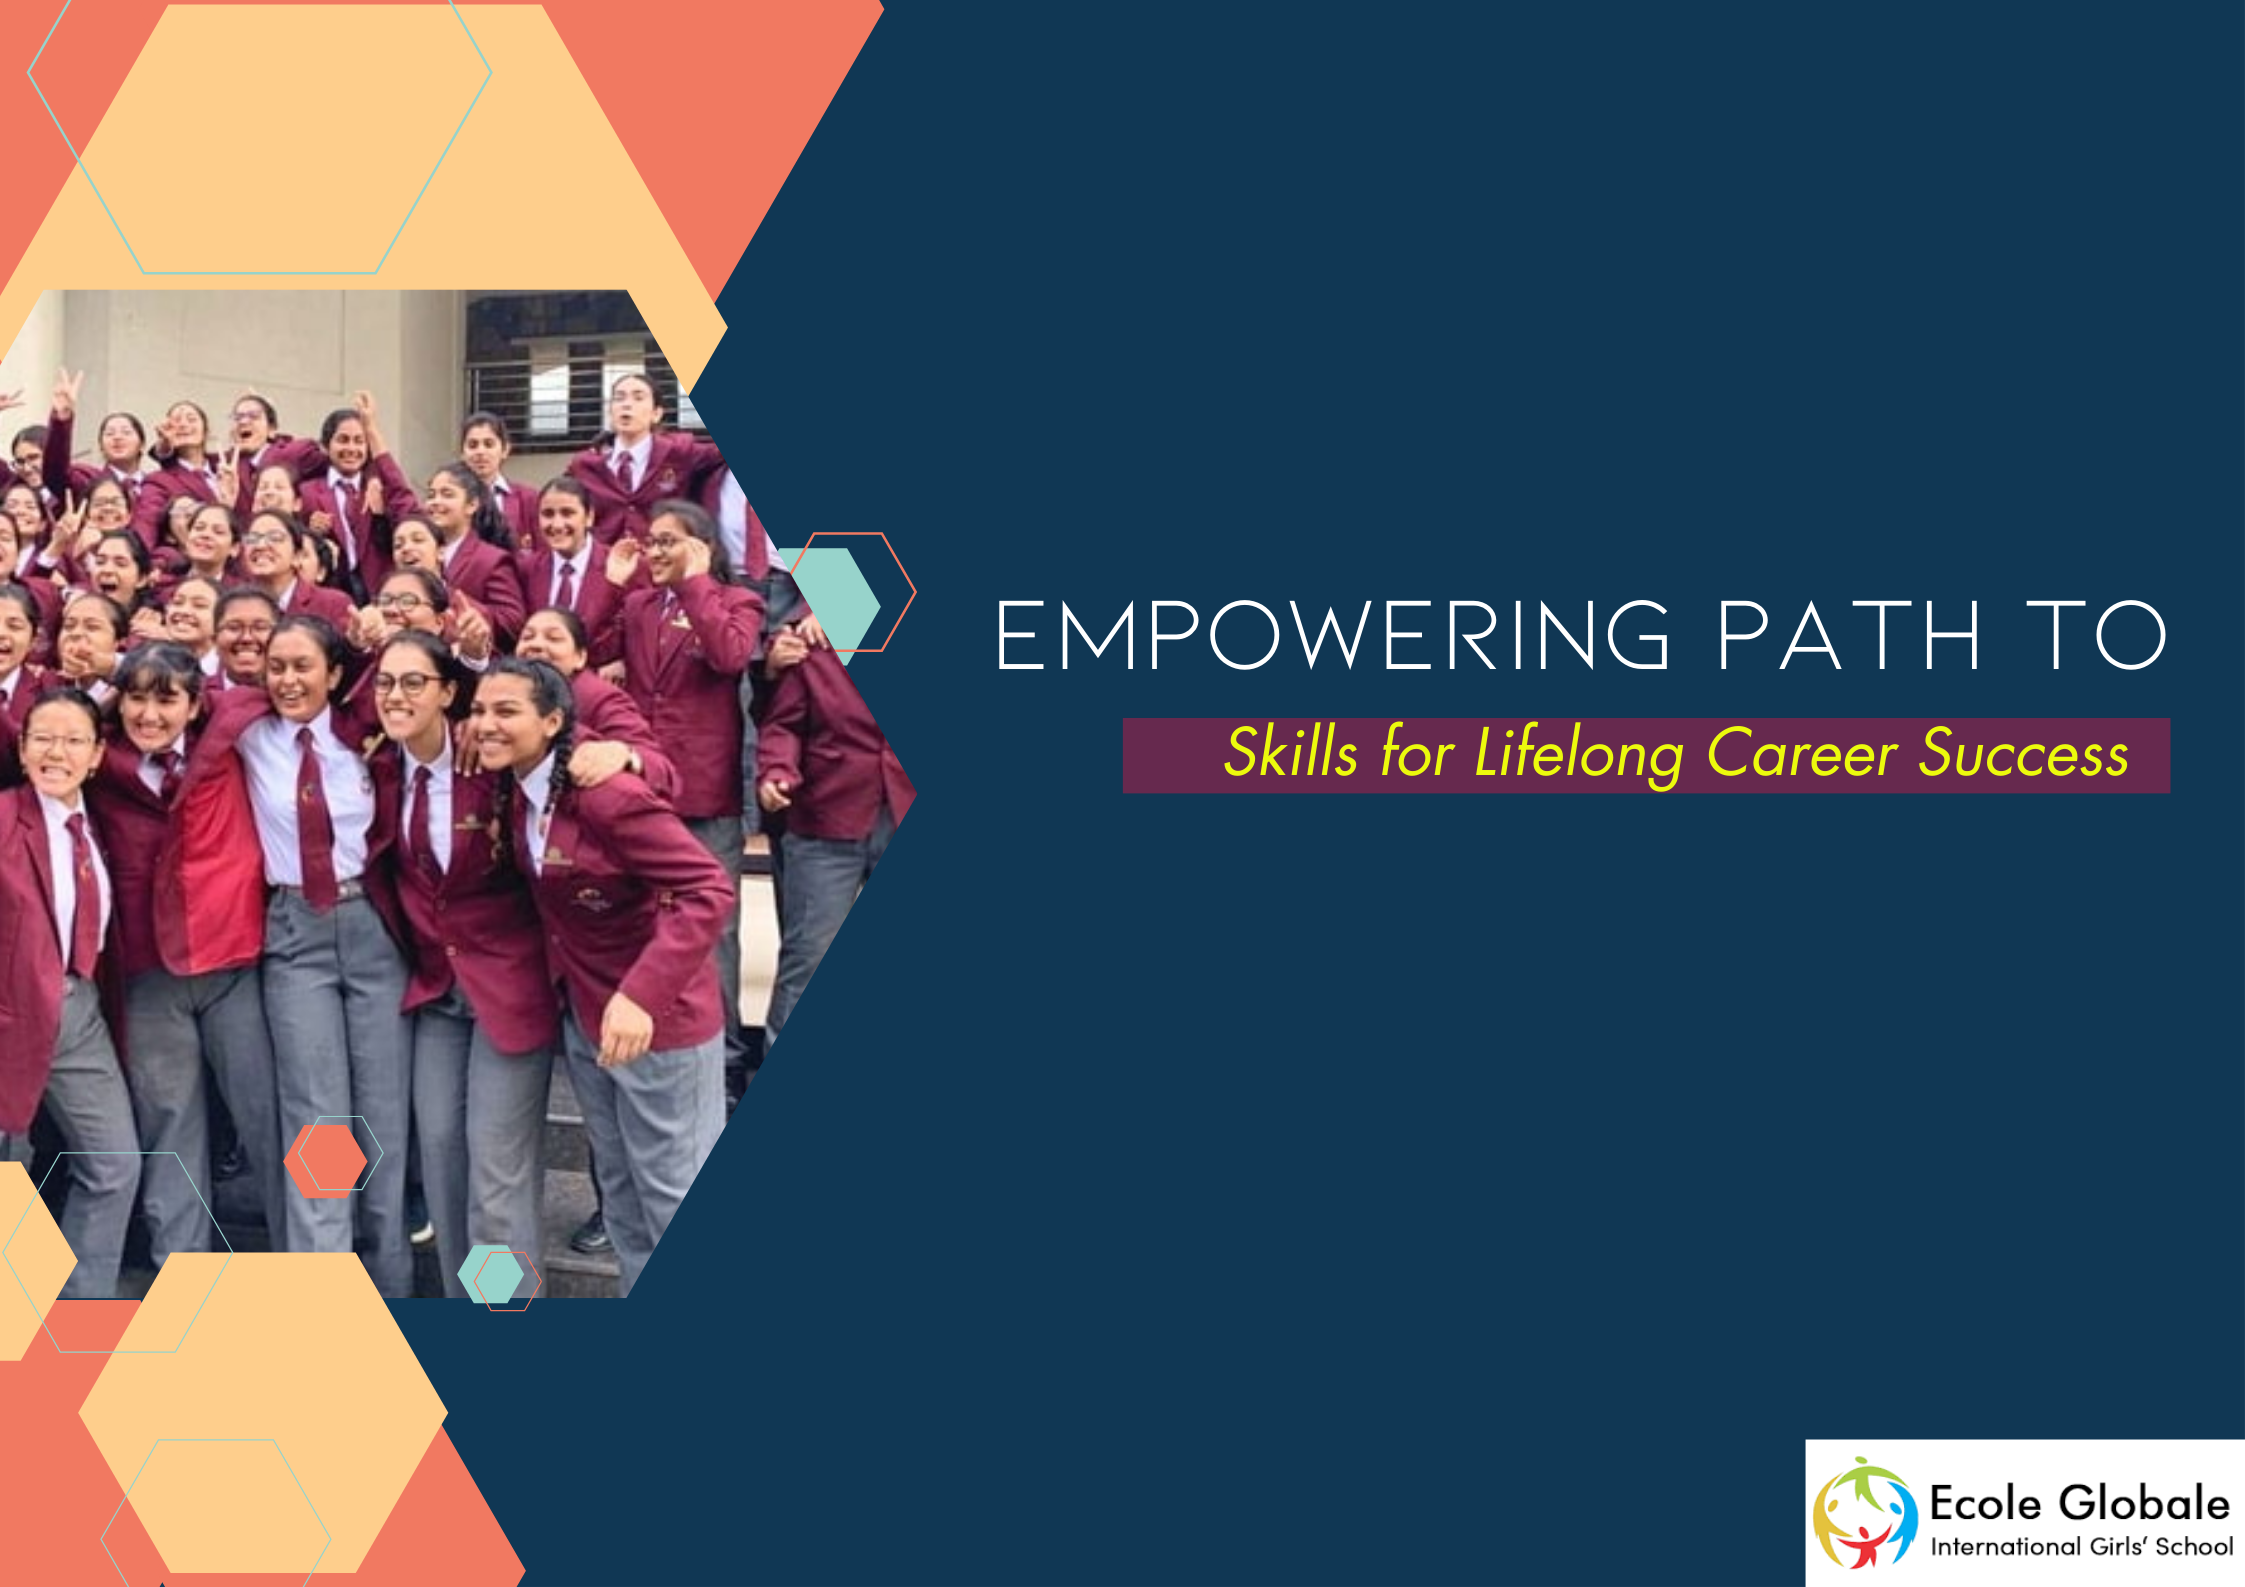 You are currently viewing Empowering Path to Skills for Lifelong Career Success | Ecole Globale